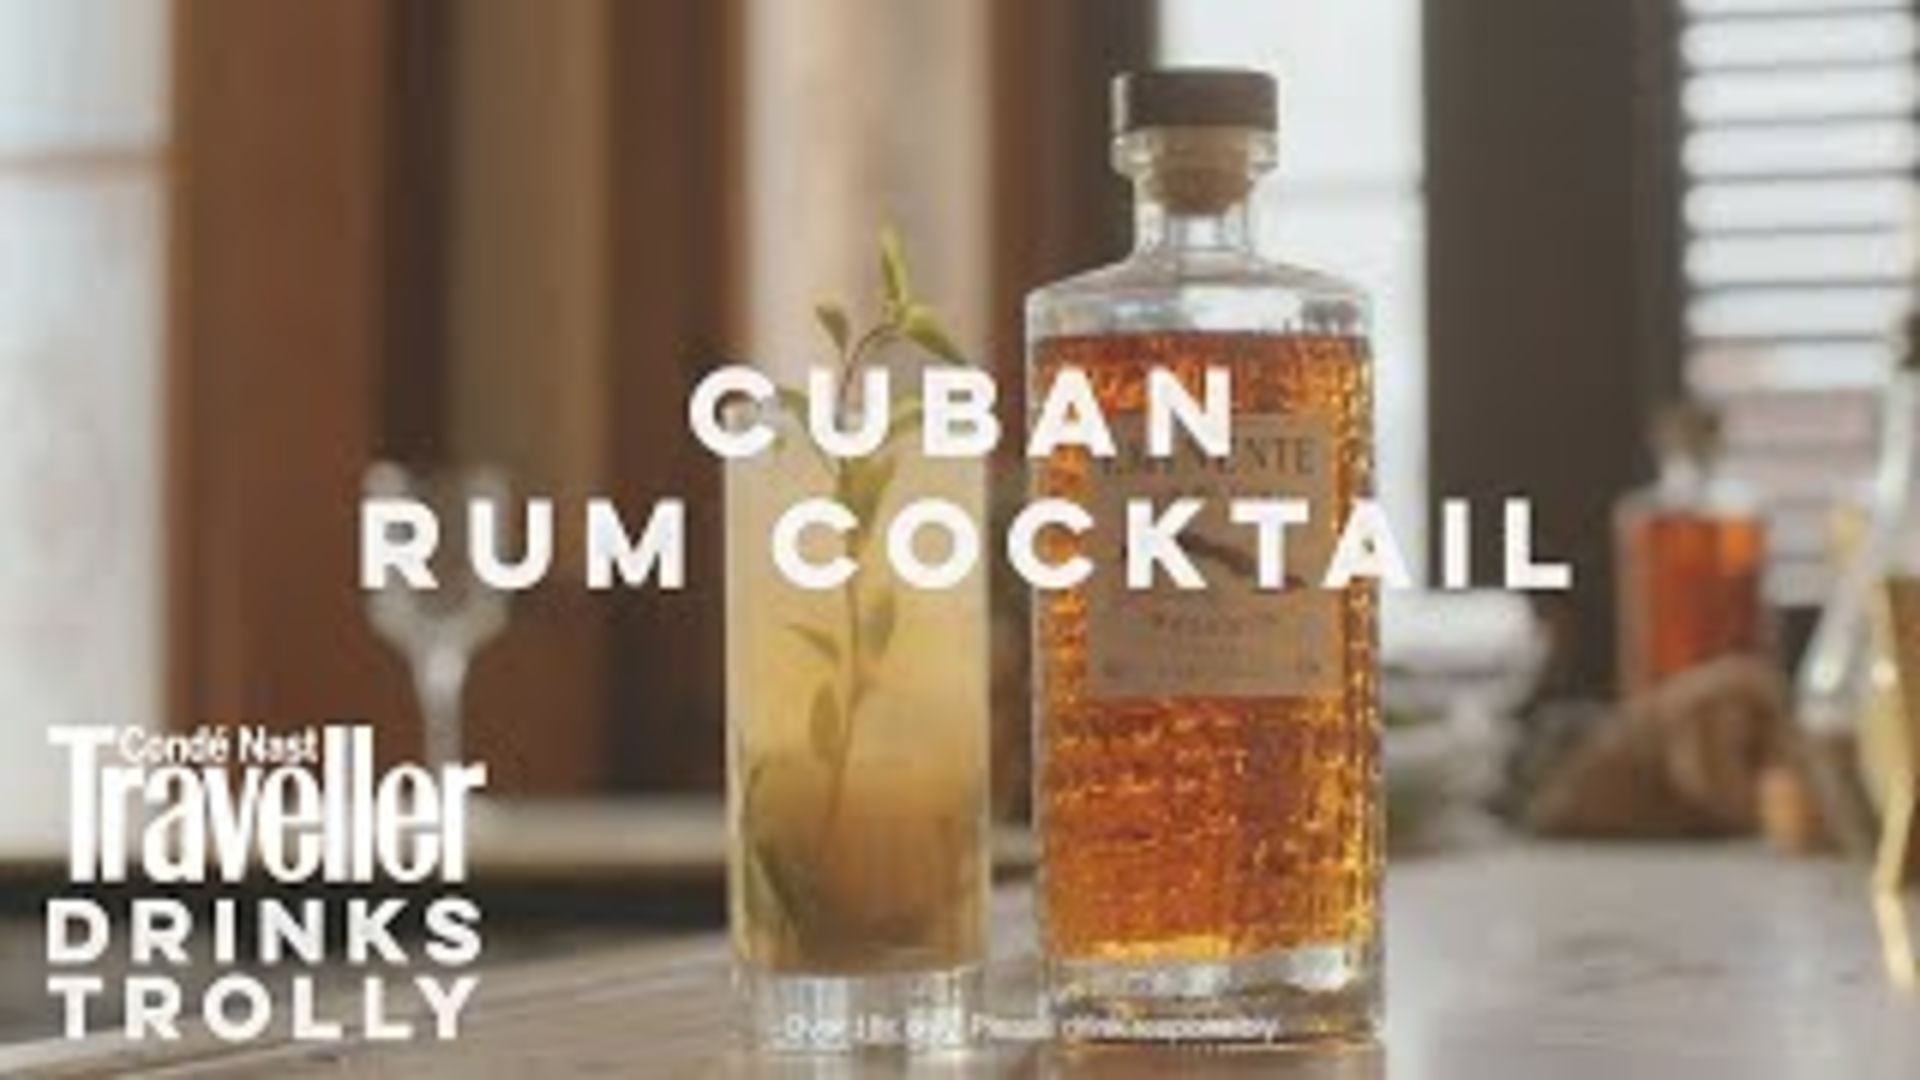 Recipe: How to make a Cuban rum cocktail with Eminente